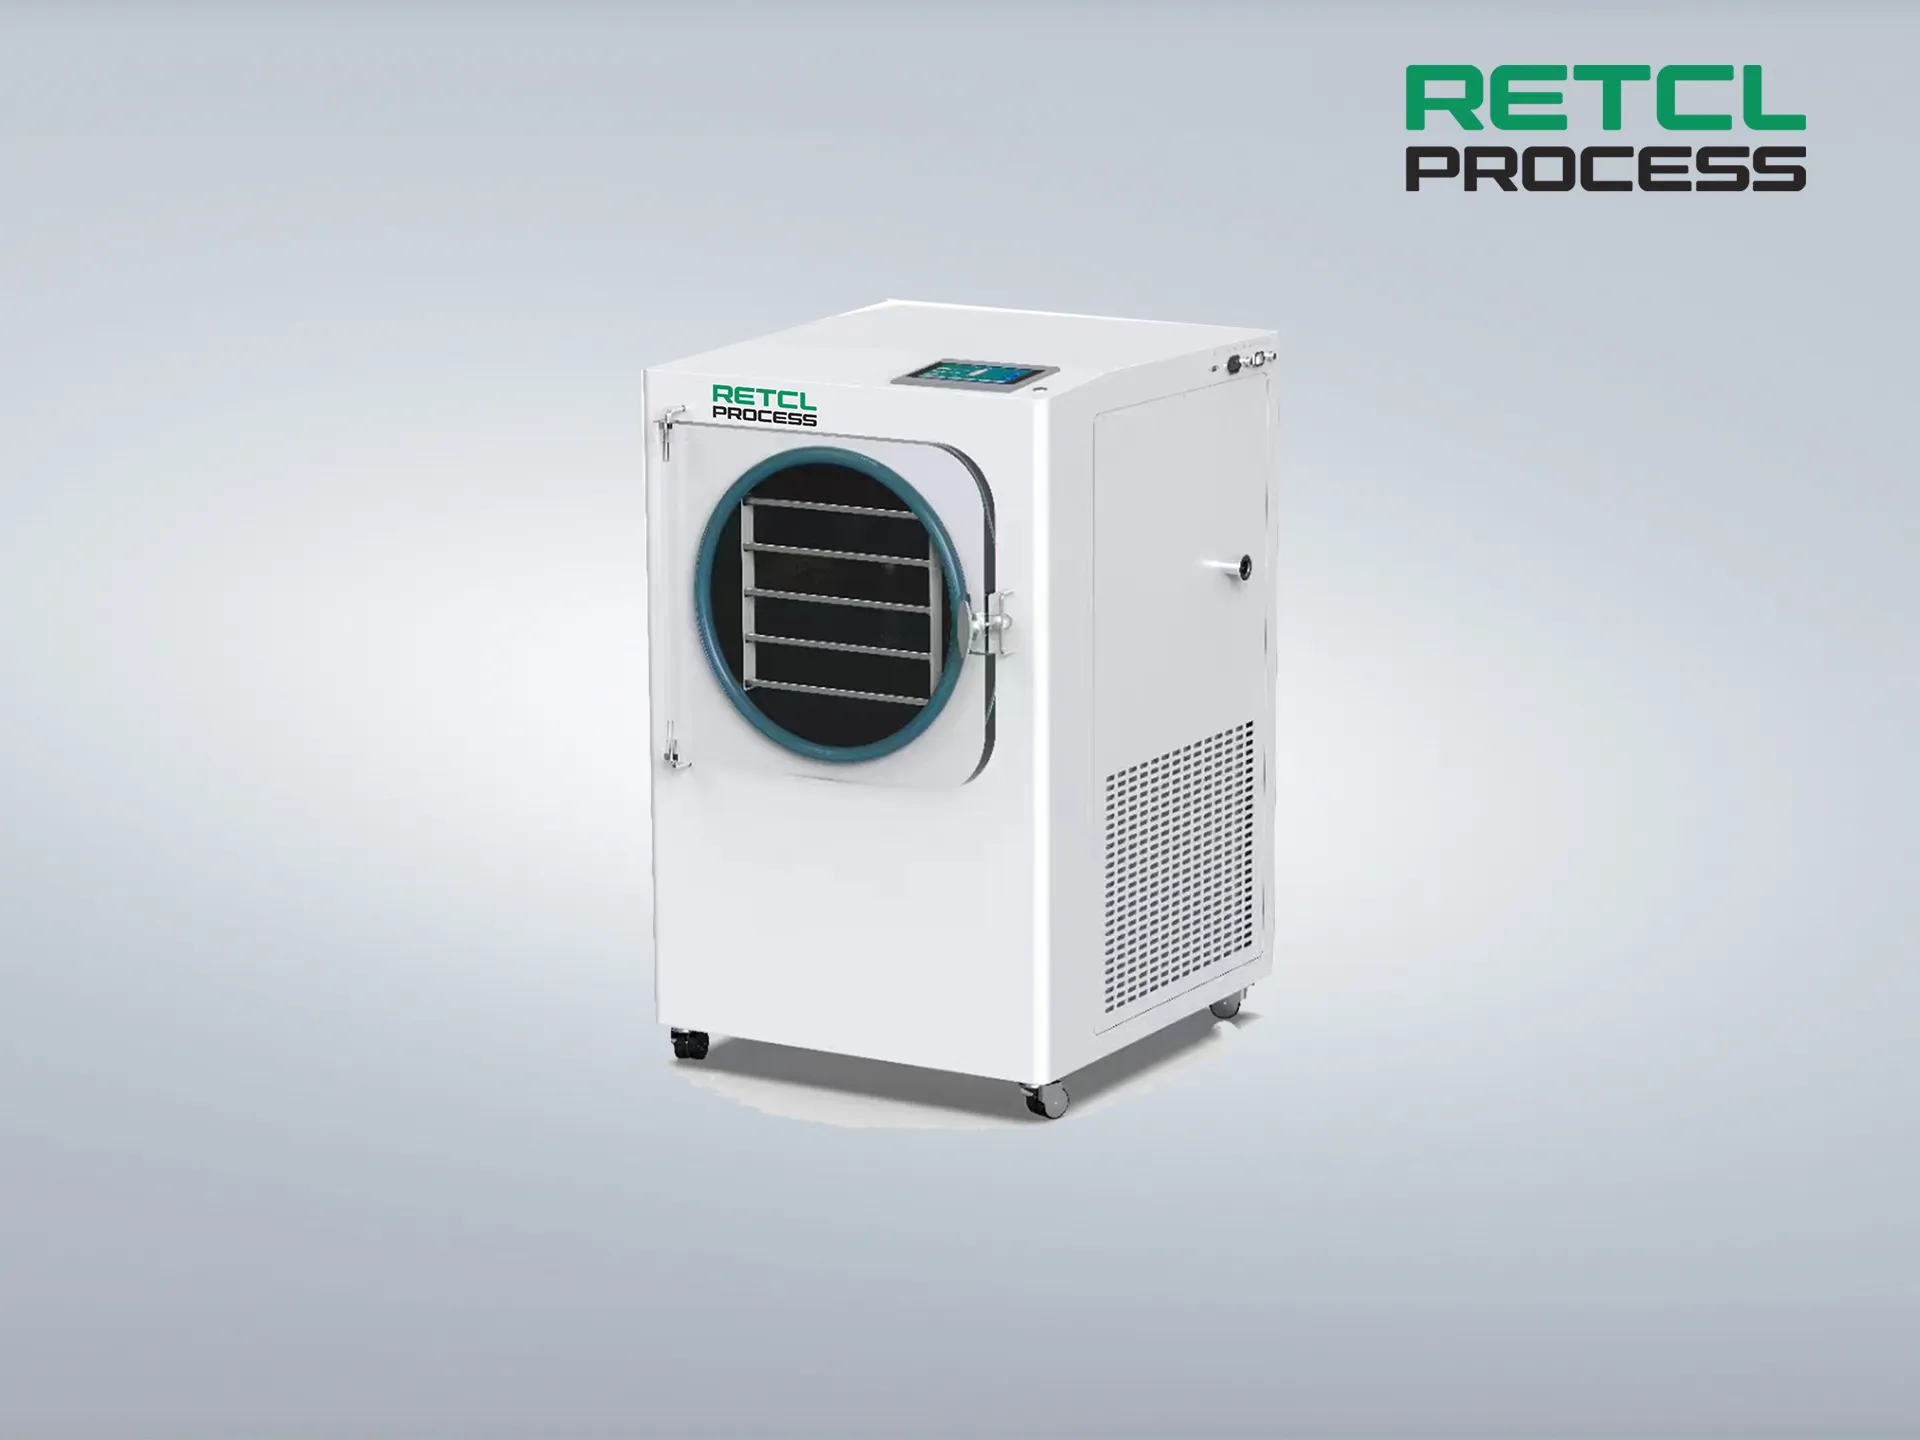 Retcl Process commercial food freeze dryer machine with shelves and digital display on a gray background.